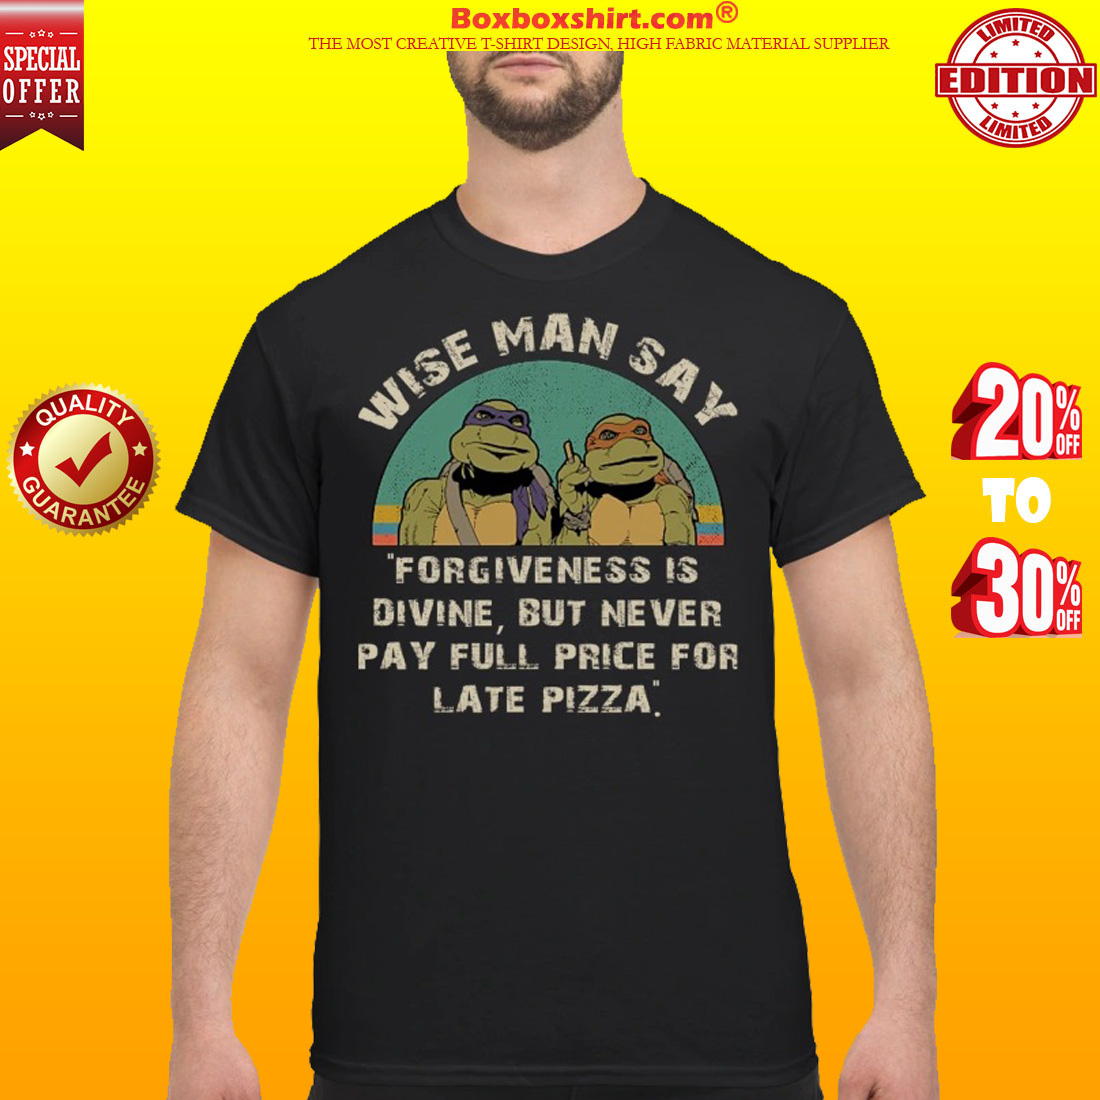 Wise man say forgiveness is divine but never pay full price for late pizza classic shirt